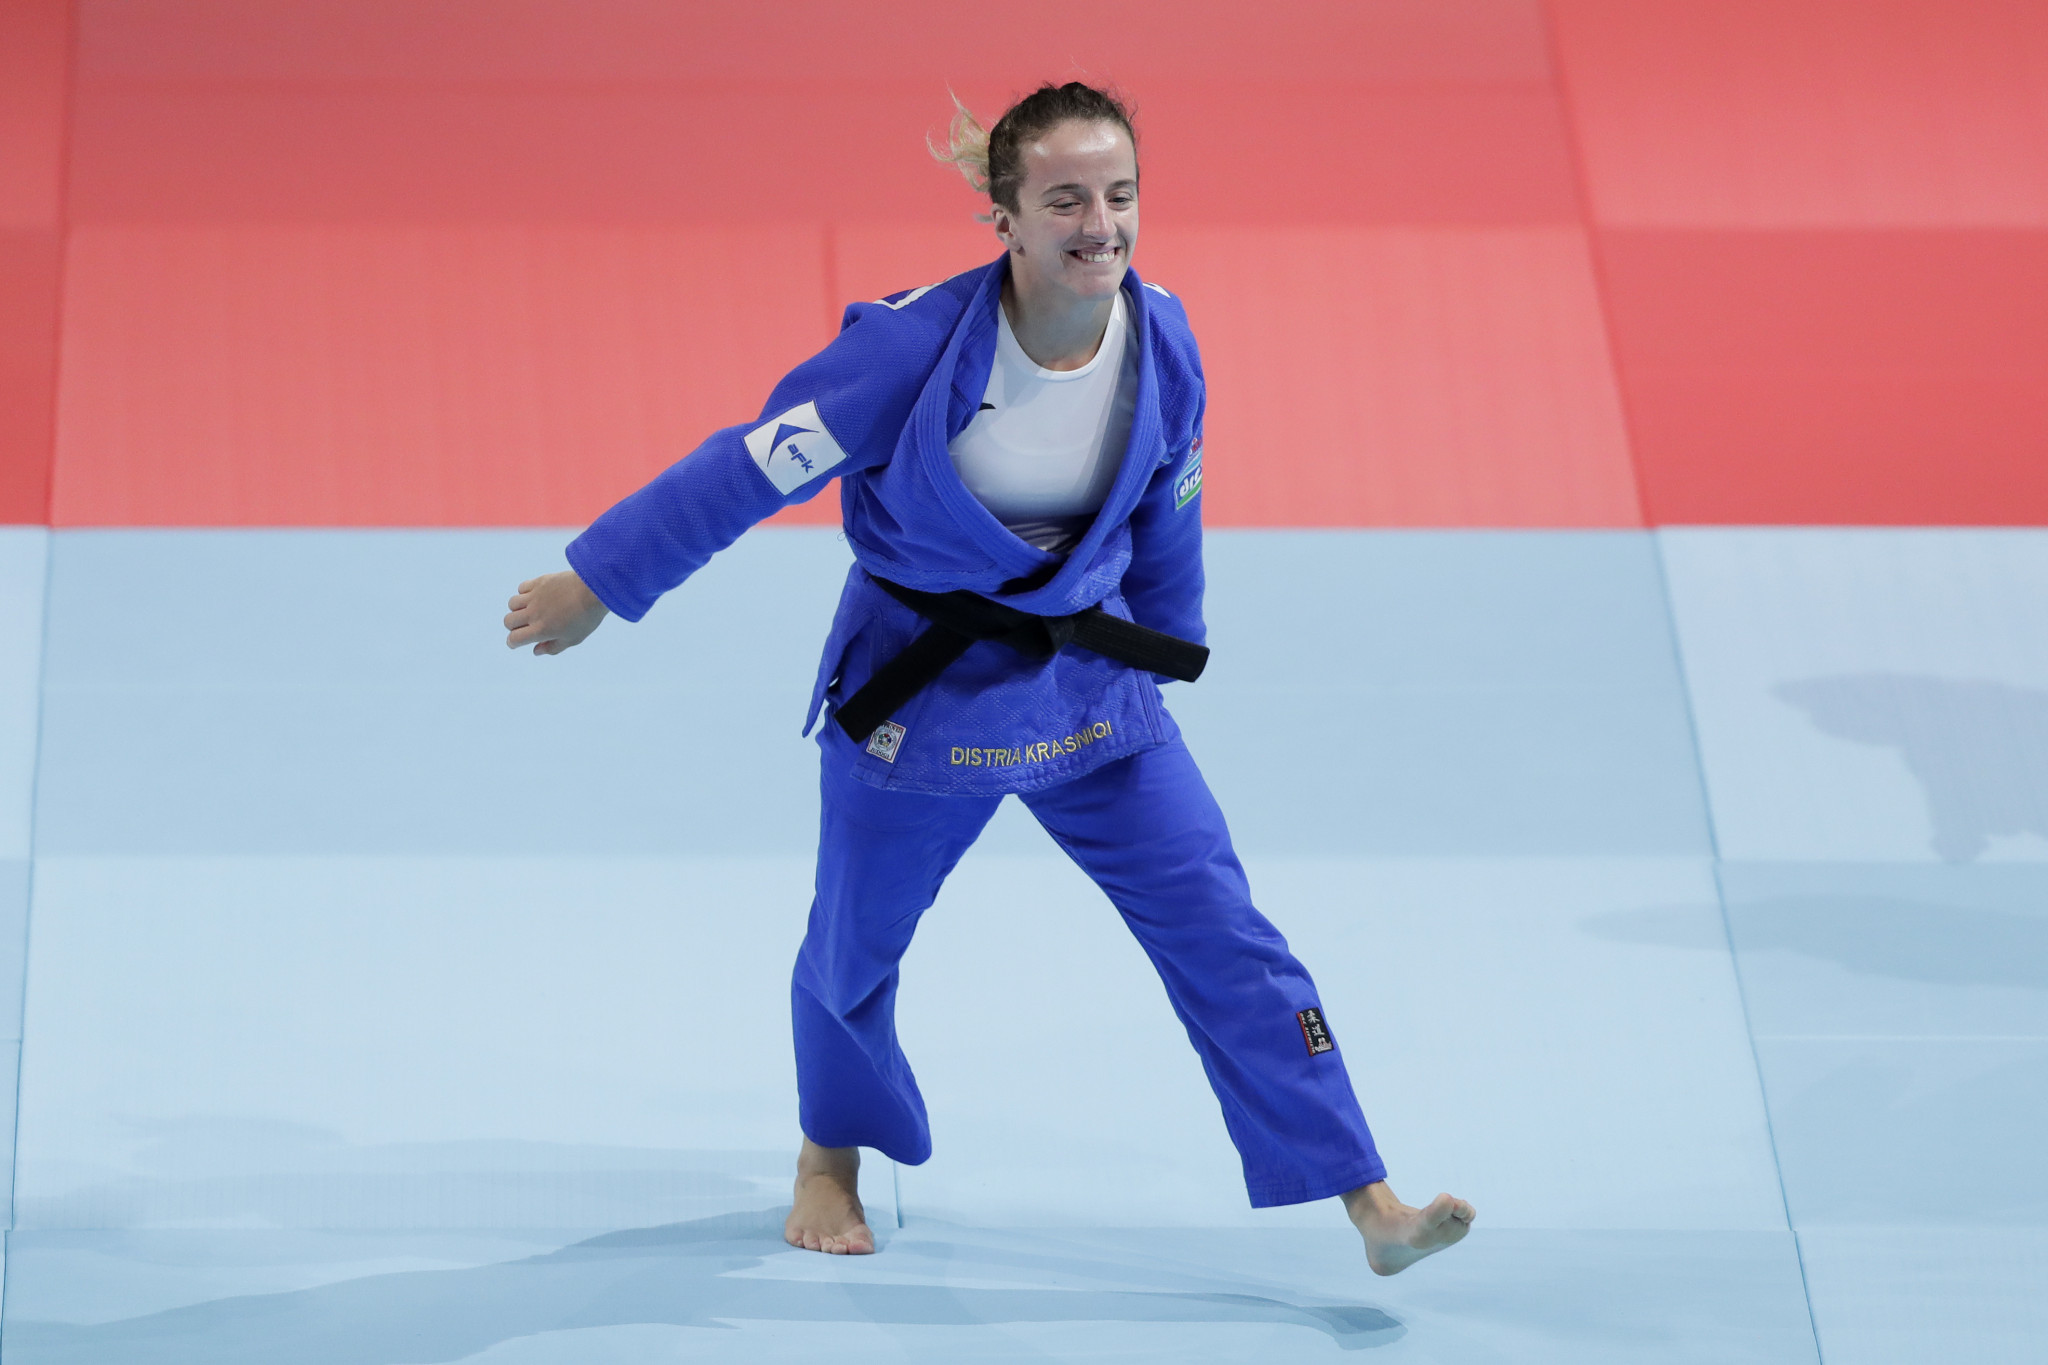 Distria Krasniqi is one of several Tokyo 2020 hopefuls for Kosovo ©Getty Images